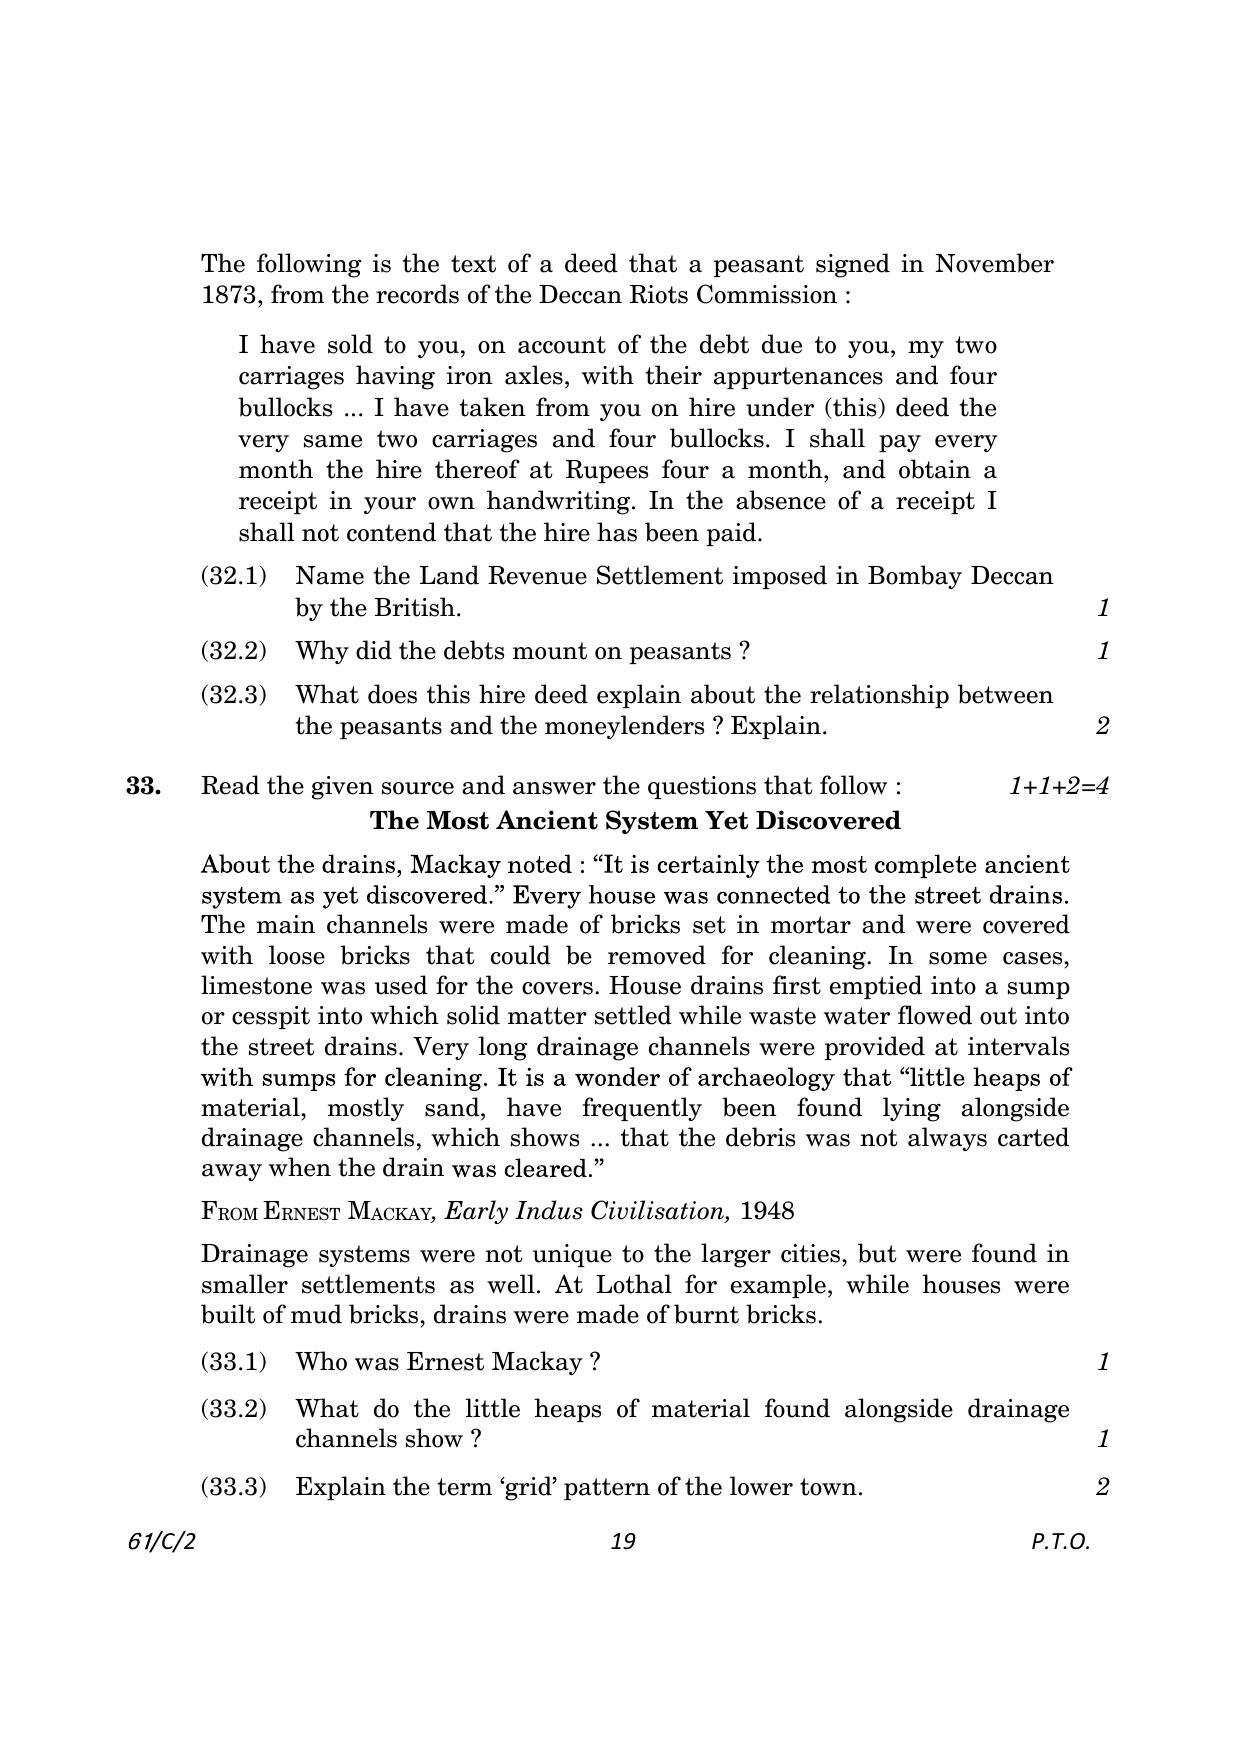 CBSE Class 12 61-2 History 2023 (Compartment) Question Paper - Page 19